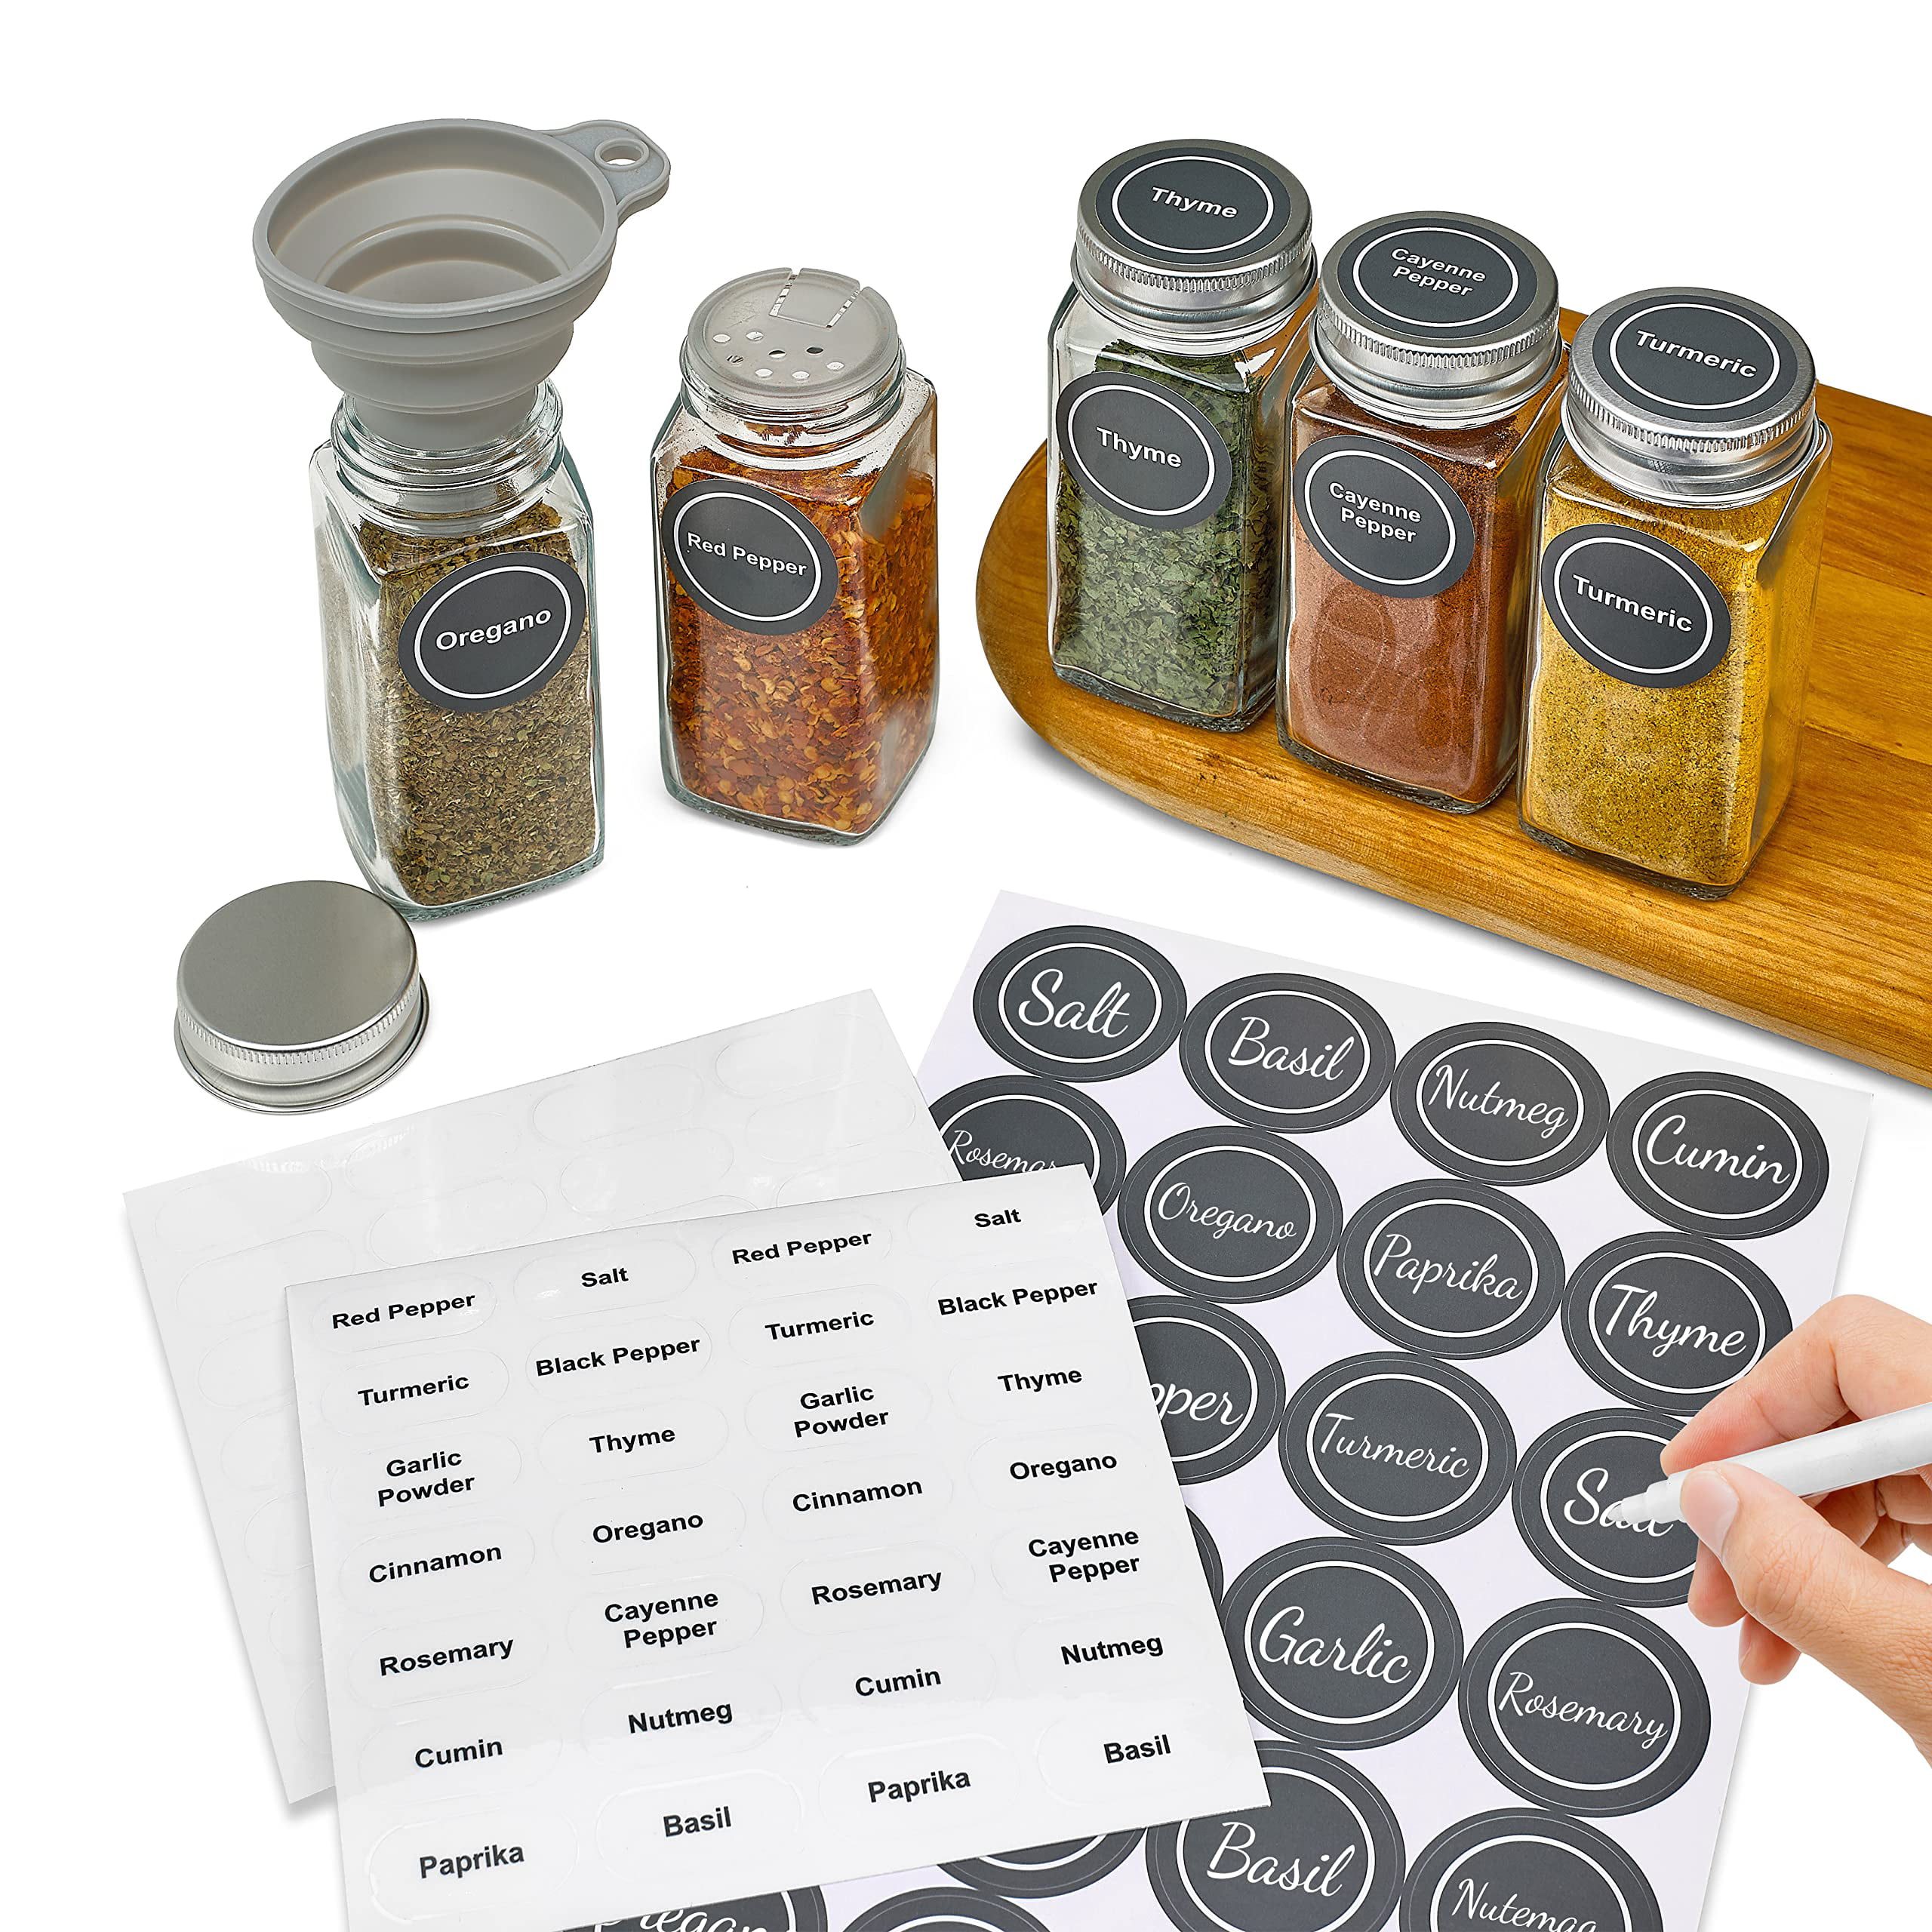 36 Spice Jars with 547 Labels- Glass Spice Jars with Black Metal